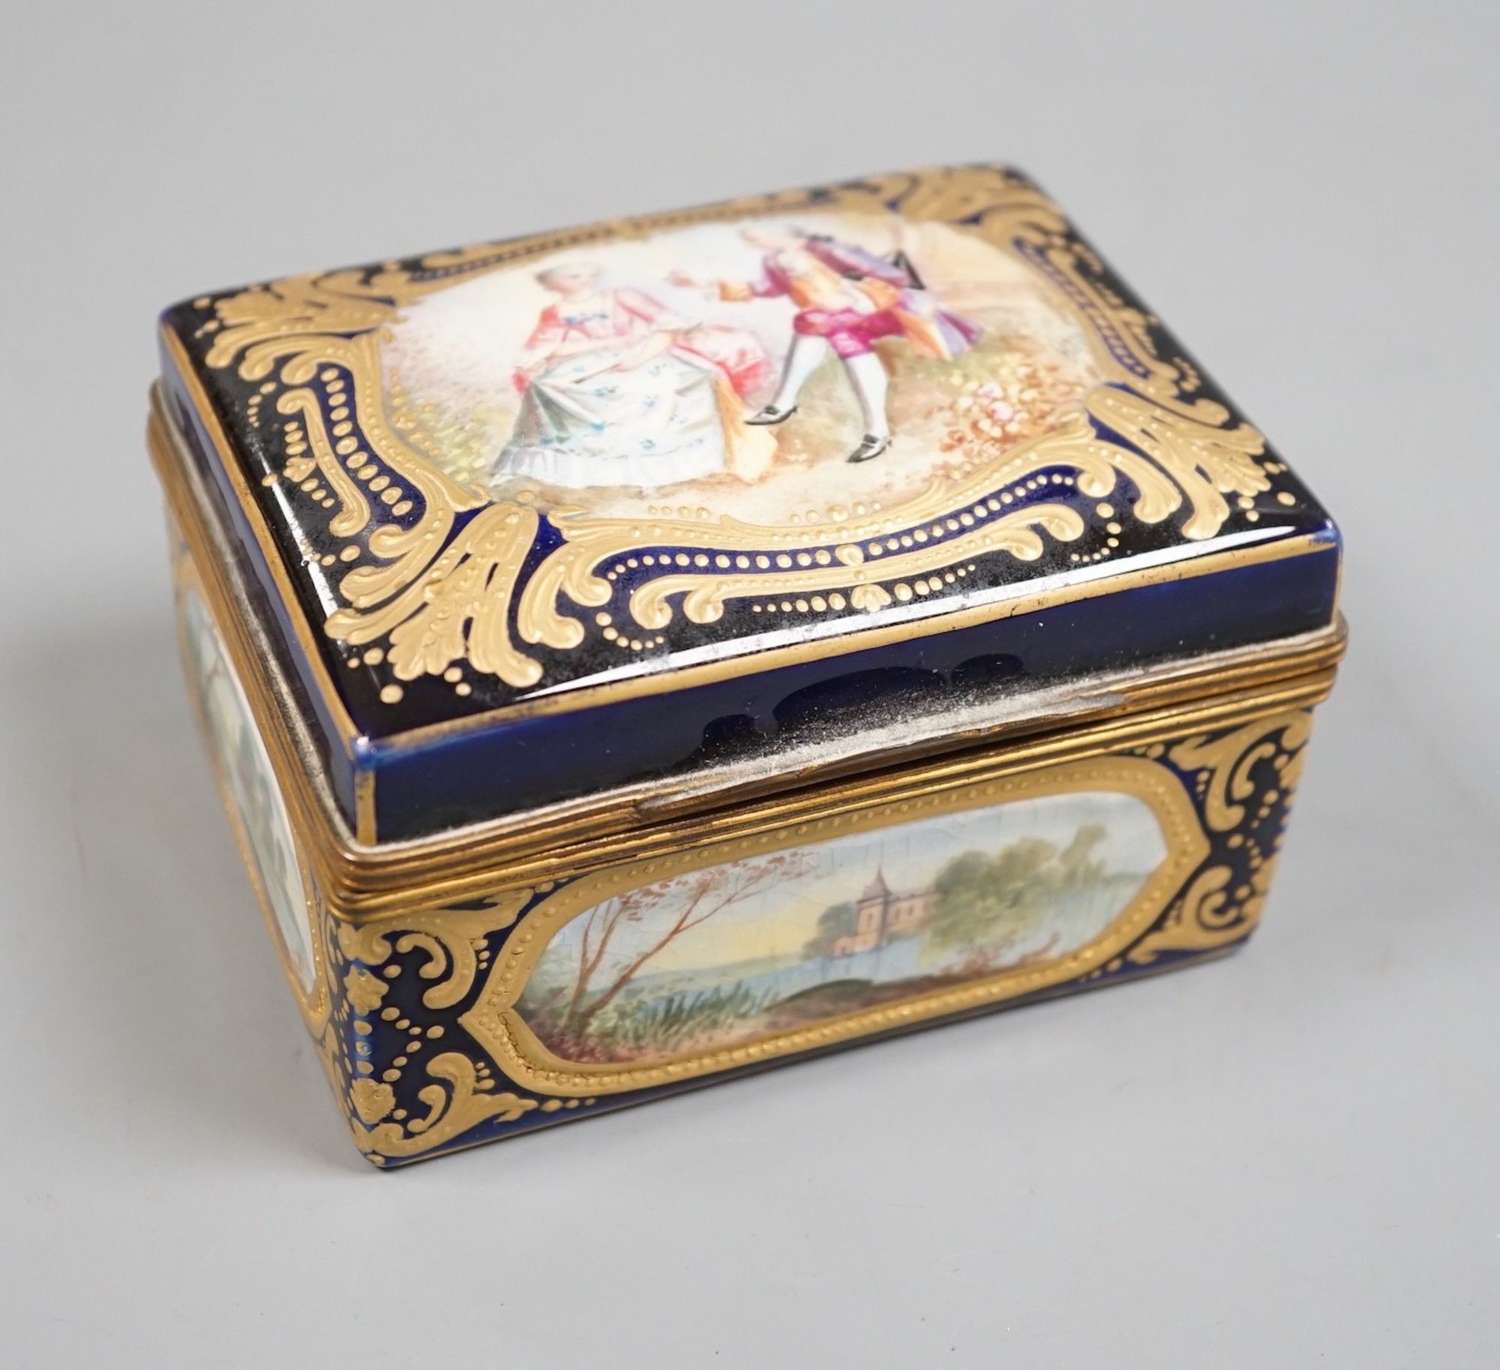 A small French trinket box